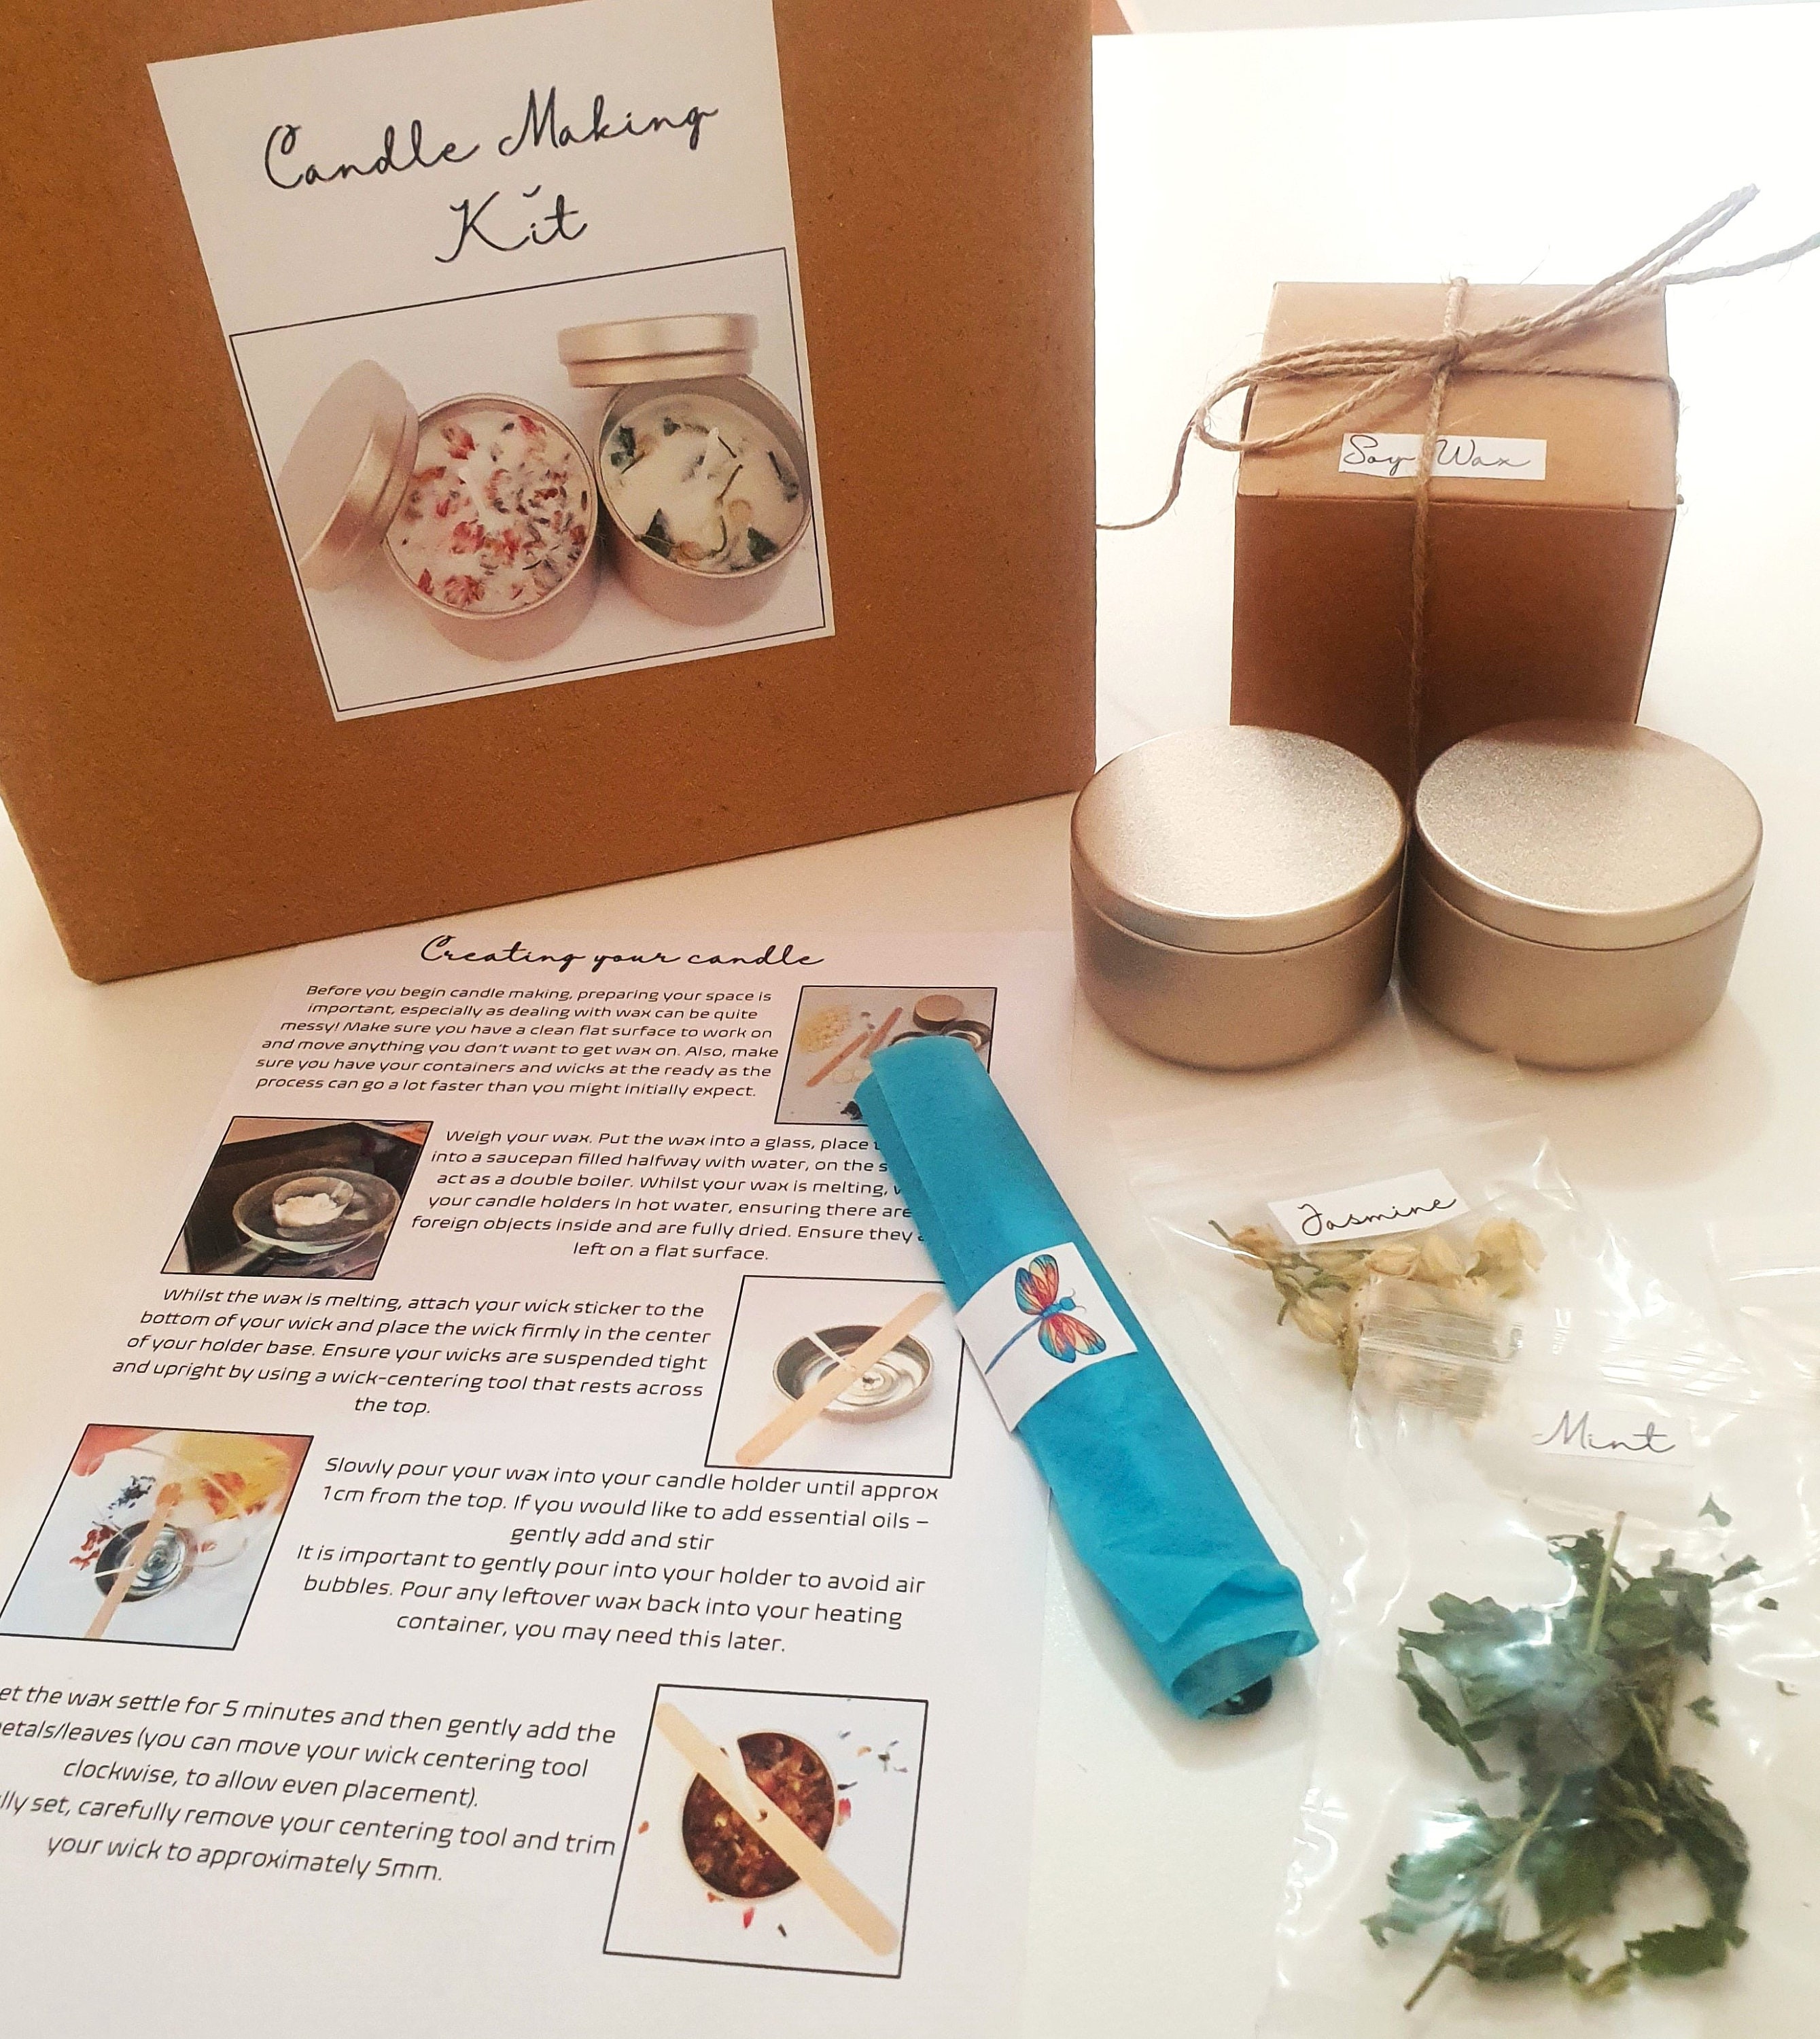 DIY Candle Making Kit, Soy Candle Making Kit, Make Your Own Candle